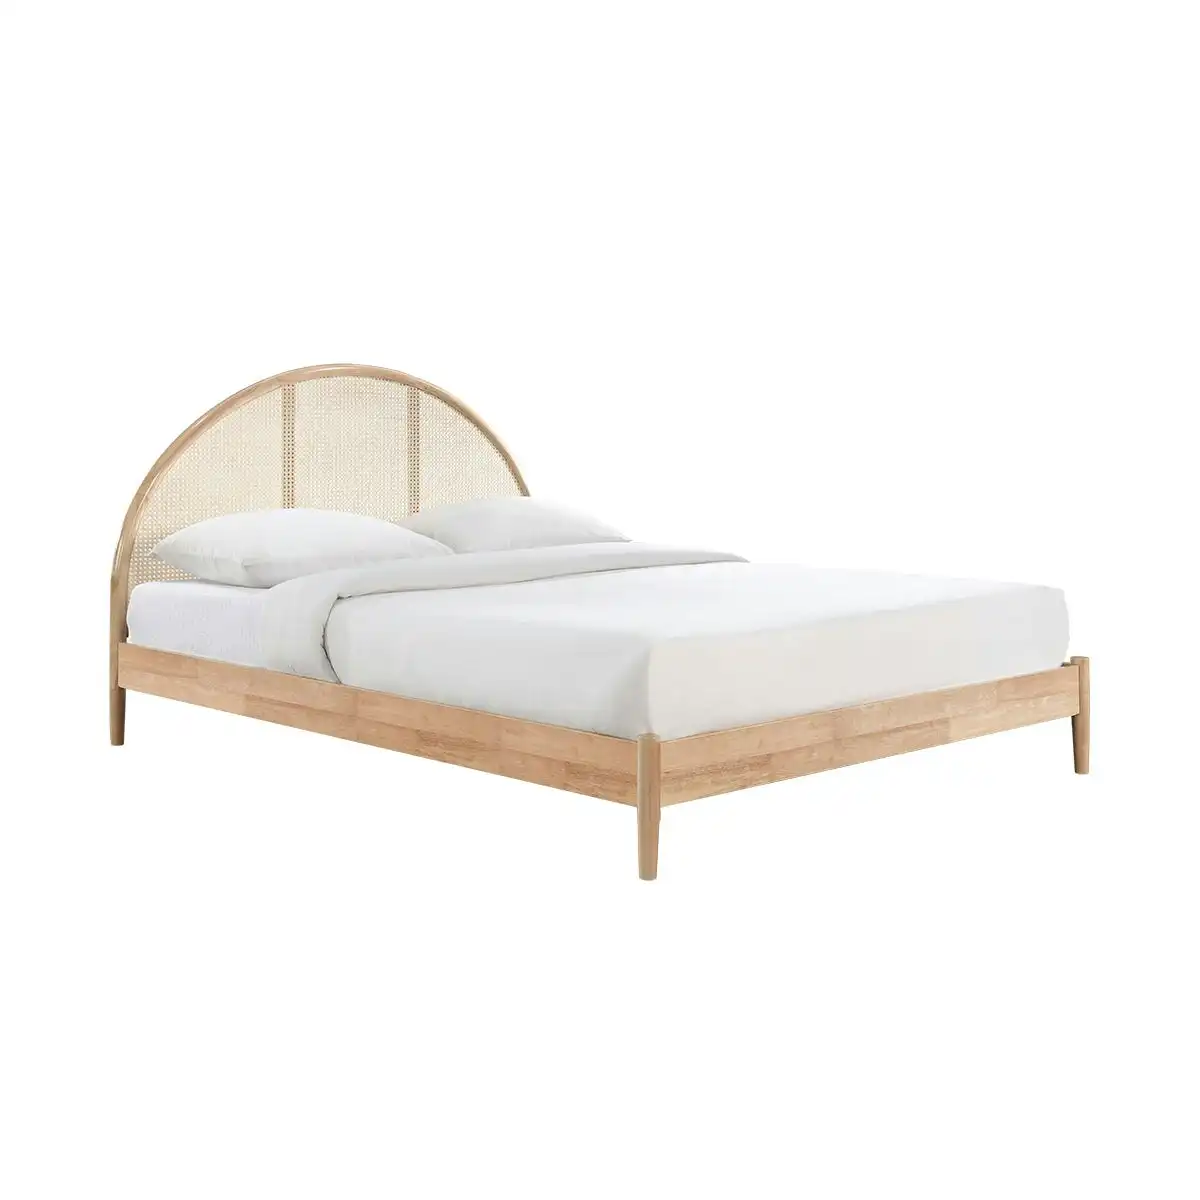 Avery Arch Rattan Double Bed (Natural)